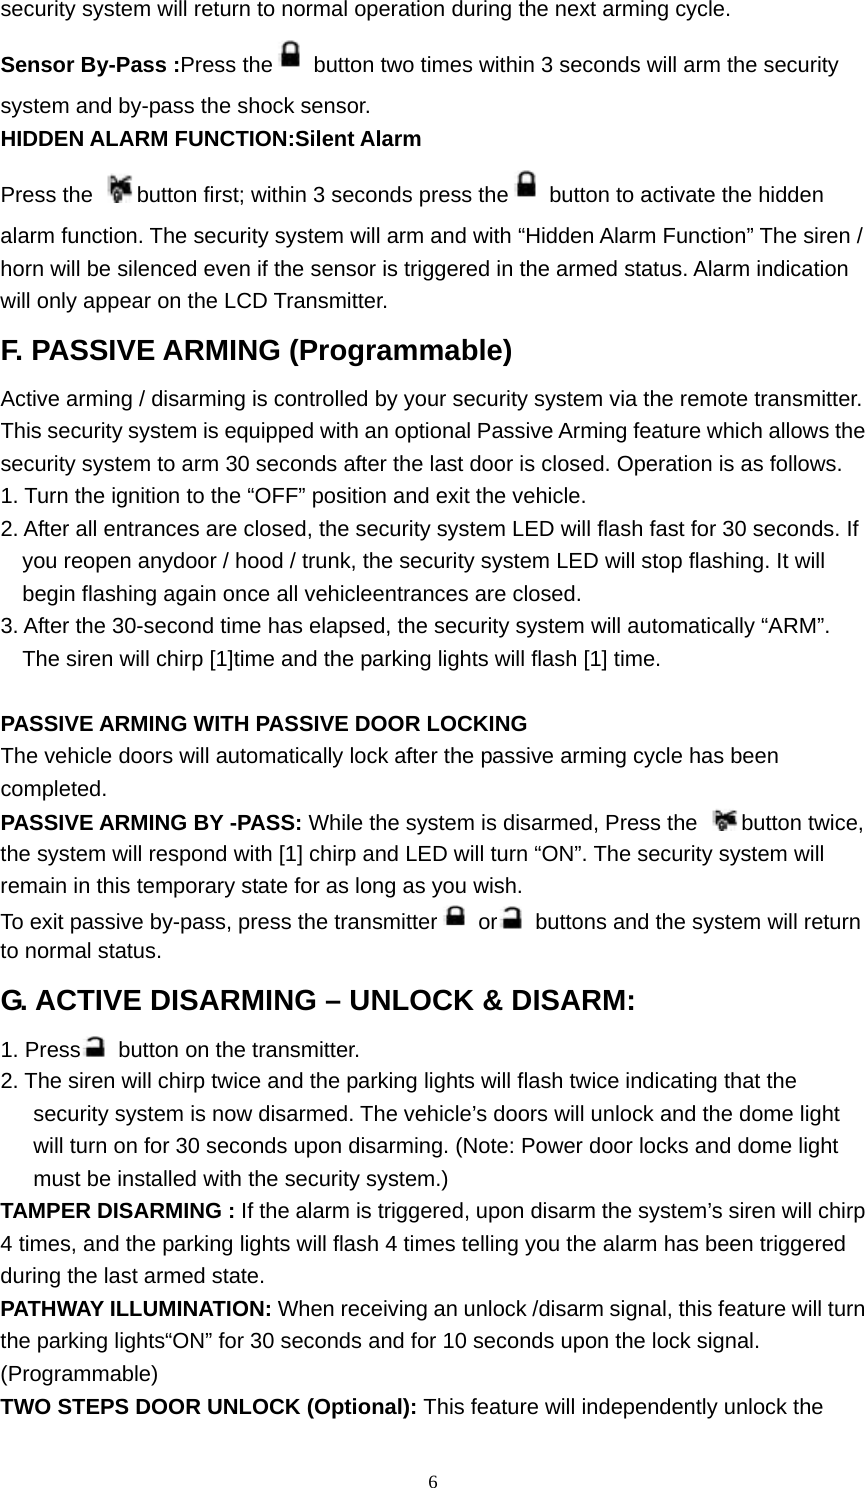  6security system will return to normal operation during the next arming cycle. Sensor By-Pass :Press the   button two times within 3 seconds will arm the security system and by-pass the shock sensor. HIDDEN ALARM FUNCTION:Silent Alarm Press the  button first; within 3 seconds press the   button to activate the hidden alarm function. The security system will arm and with “Hidden Alarm Function” The siren / horn will be silenced even if the sensor is triggered in the armed status. Alarm indication will only appear on the LCD Transmitter. F. PASSIVE ARMING (Programmable) Active arming / disarming is controlled by your security system via the remote transmitter. This security system is equipped with an optional Passive Arming feature which allows the security system to arm 30 seconds after the last door is closed. Operation is as follows. 1. Turn the ignition to the “OFF” position and exit the vehicle. 2. After all entrances are closed, the security system LED will flash fast for 30 seconds. If you reopen anydoor / hood / trunk, the security system LED will stop flashing. It will begin flashing again once all vehicleentrances are closed. 3. After the 30-second time has elapsed, the security system will automatically “ARM”. The siren will chirp [1]time and the parking lights will flash [1] time.  PASSIVE ARMING WITH PASSIVE DOOR LOCKING The vehicle doors will automatically lock after the passive arming cycle has been completed. PASSIVE ARMING BY -PASS: While the system is disarmed, Press the  button twice, the system will respond with [1] chirp and LED will turn “ON”. The security system will remain in this temporary state for as long as you wish. To exit passive by-pass, press the transmitter  or   buttons and the system will return to normal status. G. ACTIVE DISARMING – UNLOCK &amp; DISARM: 1. Press   button on the transmitter. 2. The siren will chirp twice and the parking lights will flash twice indicating that the security system is now disarmed. The vehicle’s doors will unlock and the dome light will turn on for 30 seconds upon disarming. (Note: Power door locks and dome light must be installed with the security system.) TAMPER DISARMING : If the alarm is triggered, upon disarm the system’s siren will chirp 4 times, and the parking lights will flash 4 times telling you the alarm has been triggered during the last armed state. PATHWAY ILLUMINATION: When receiving an unlock /disarm signal, this feature will turn the parking lights“ON” for 30 seconds and for 10 seconds upon the lock signal. (Programmable) TWO STEPS DOOR UNLOCK (Optional): This feature will independently unlock the 